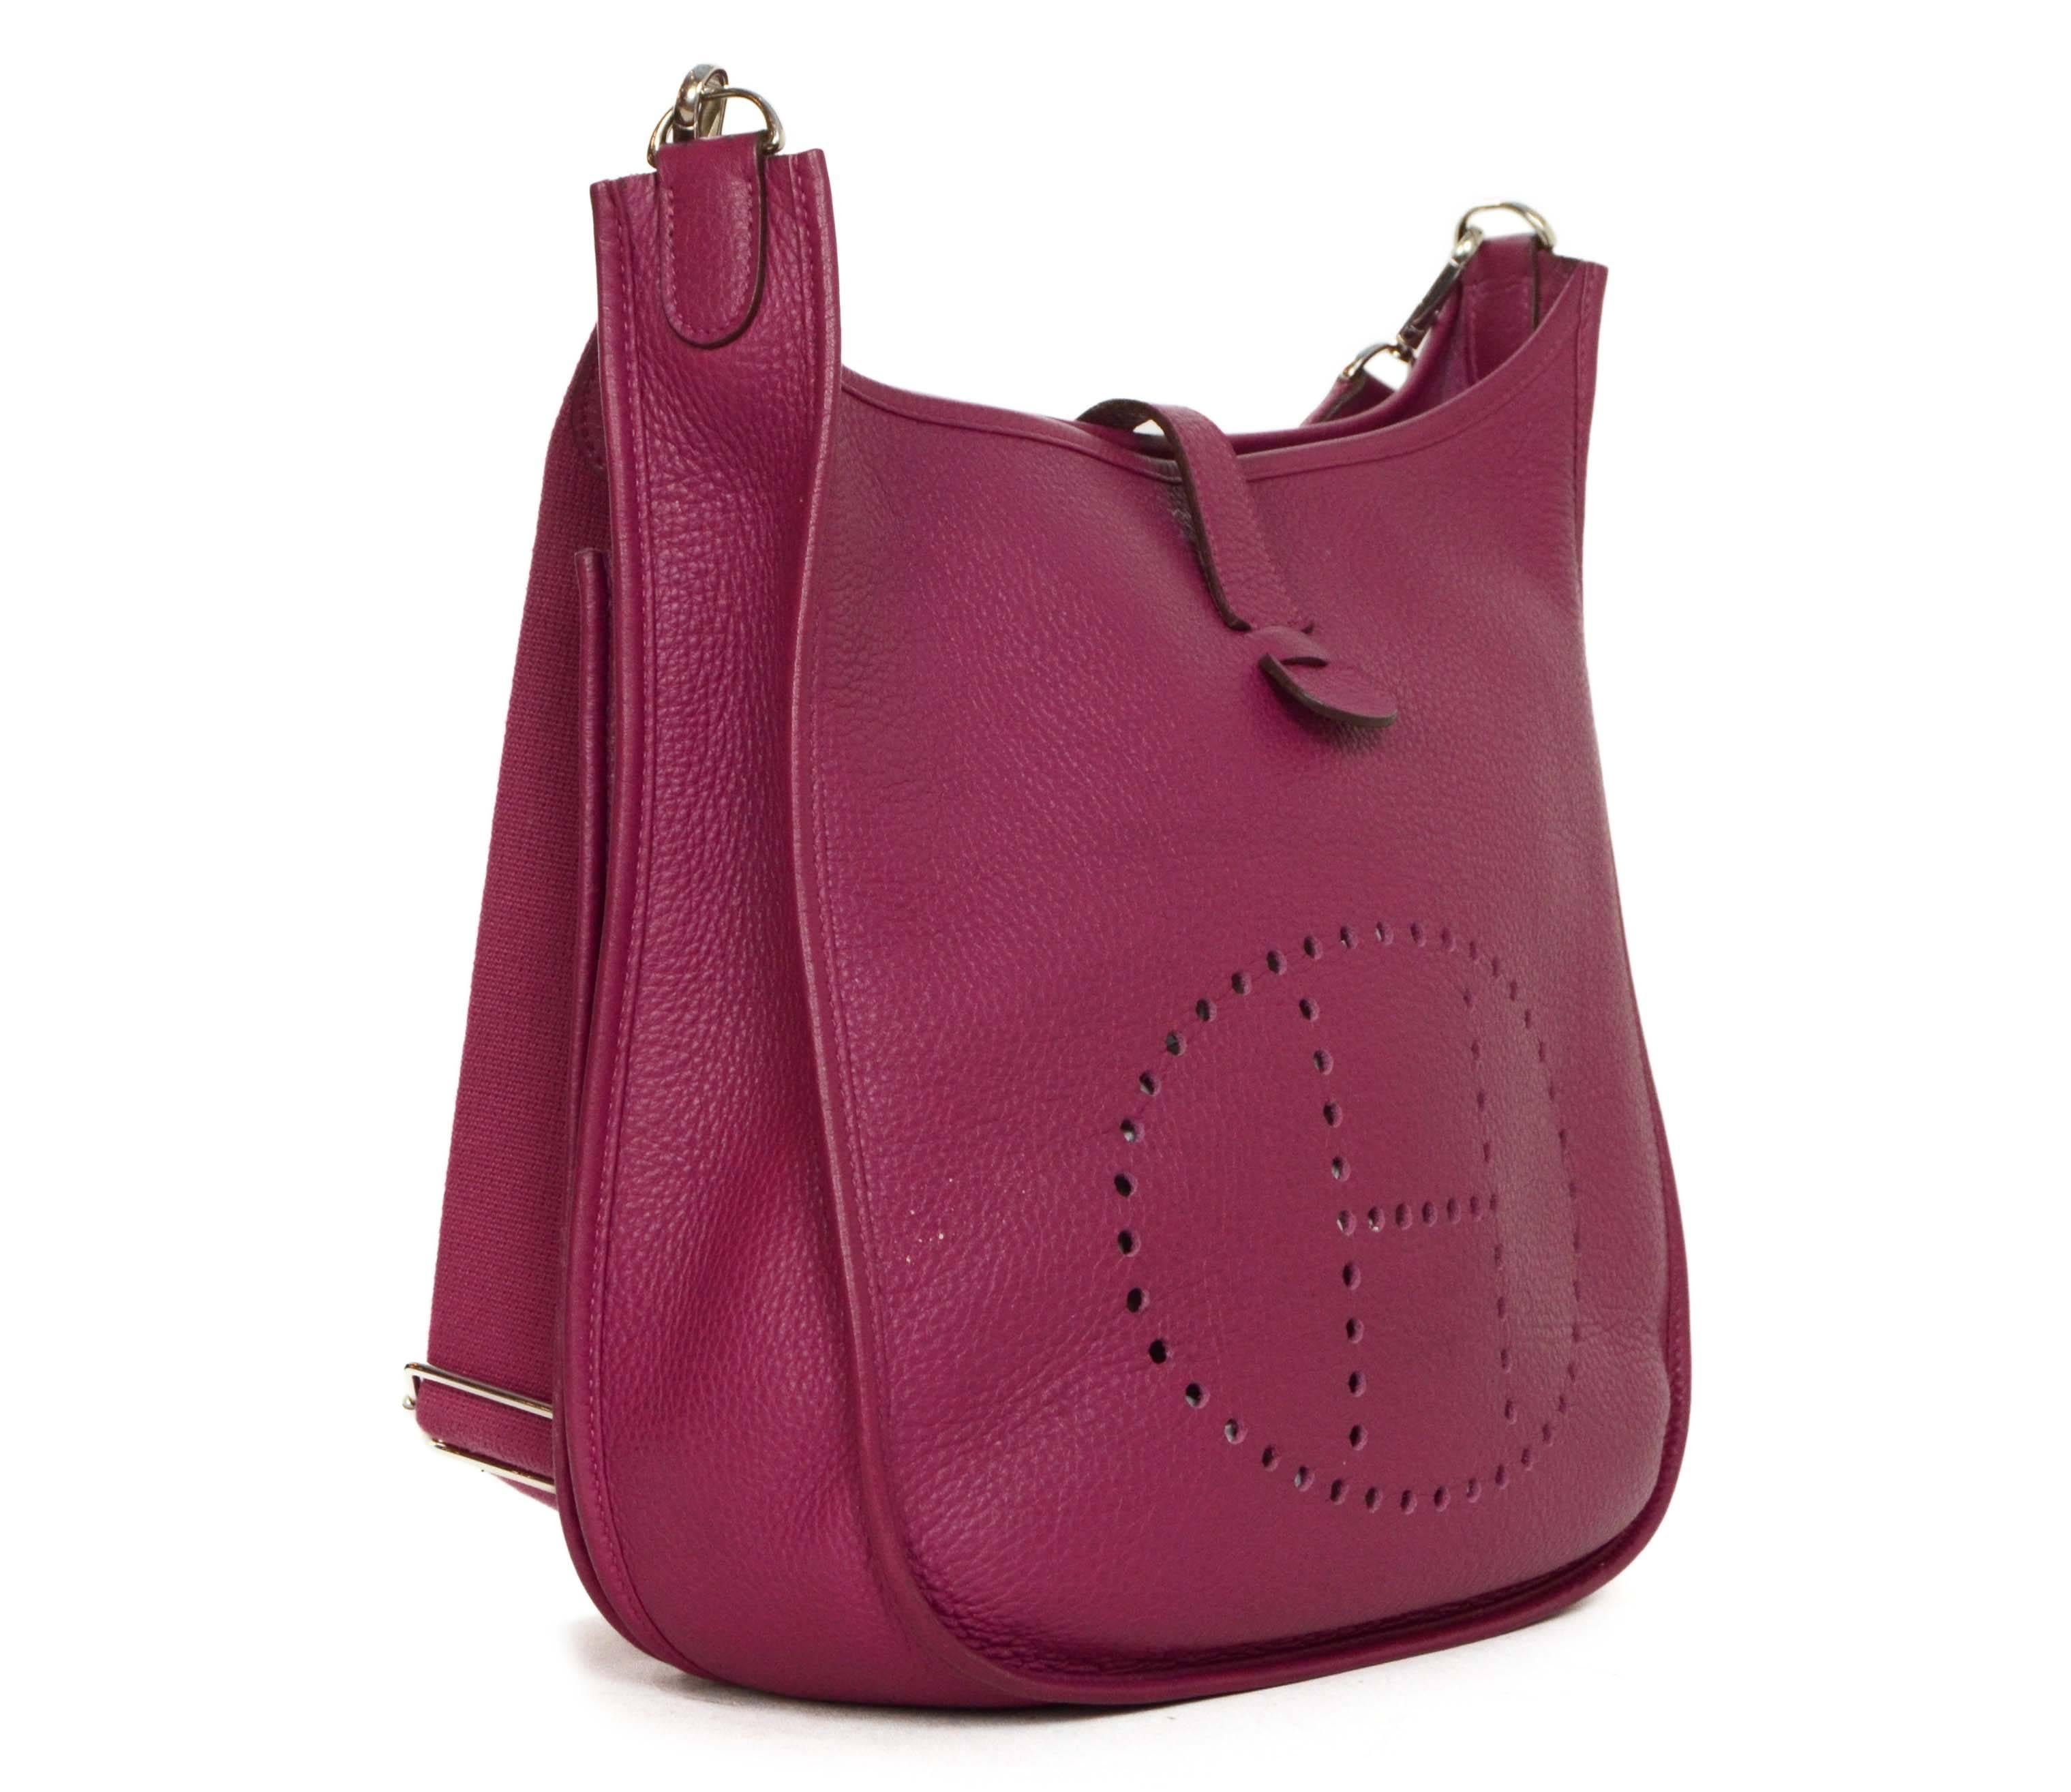 Hermes Magenta Leather Evelyne III GM Crossbody Bag 
Features adjustable shoulder strap
Made In: France
Year of Production: 2011
Color: Magenta
Hardware: Palladium
Materials: Leather
Lining: Magenta suede
Closure/Opening: Open top with